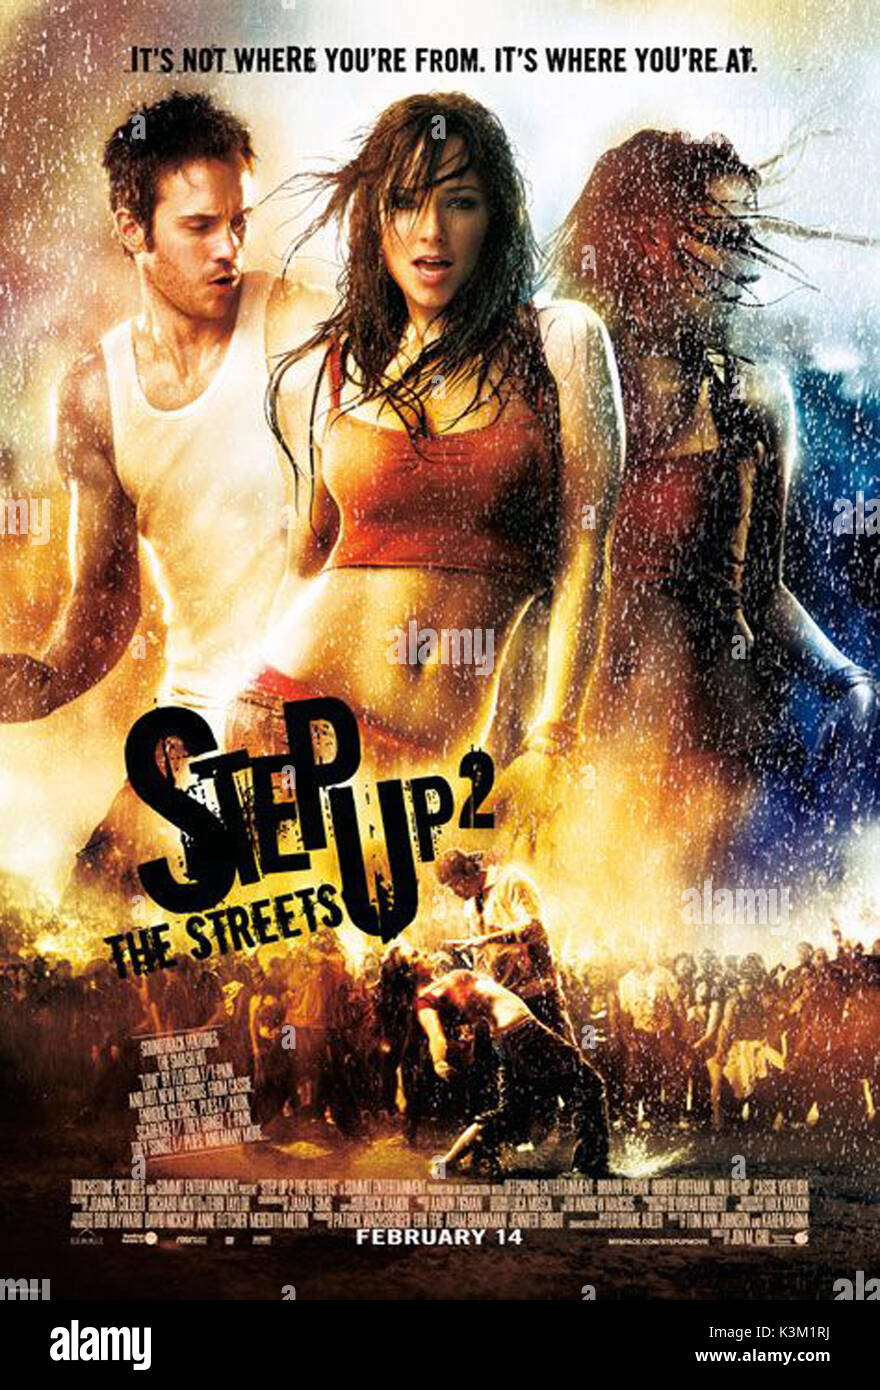 STEP UP 2 : THE STREETS BRIANA EVIGAN        Date: 2008 Stock Photo